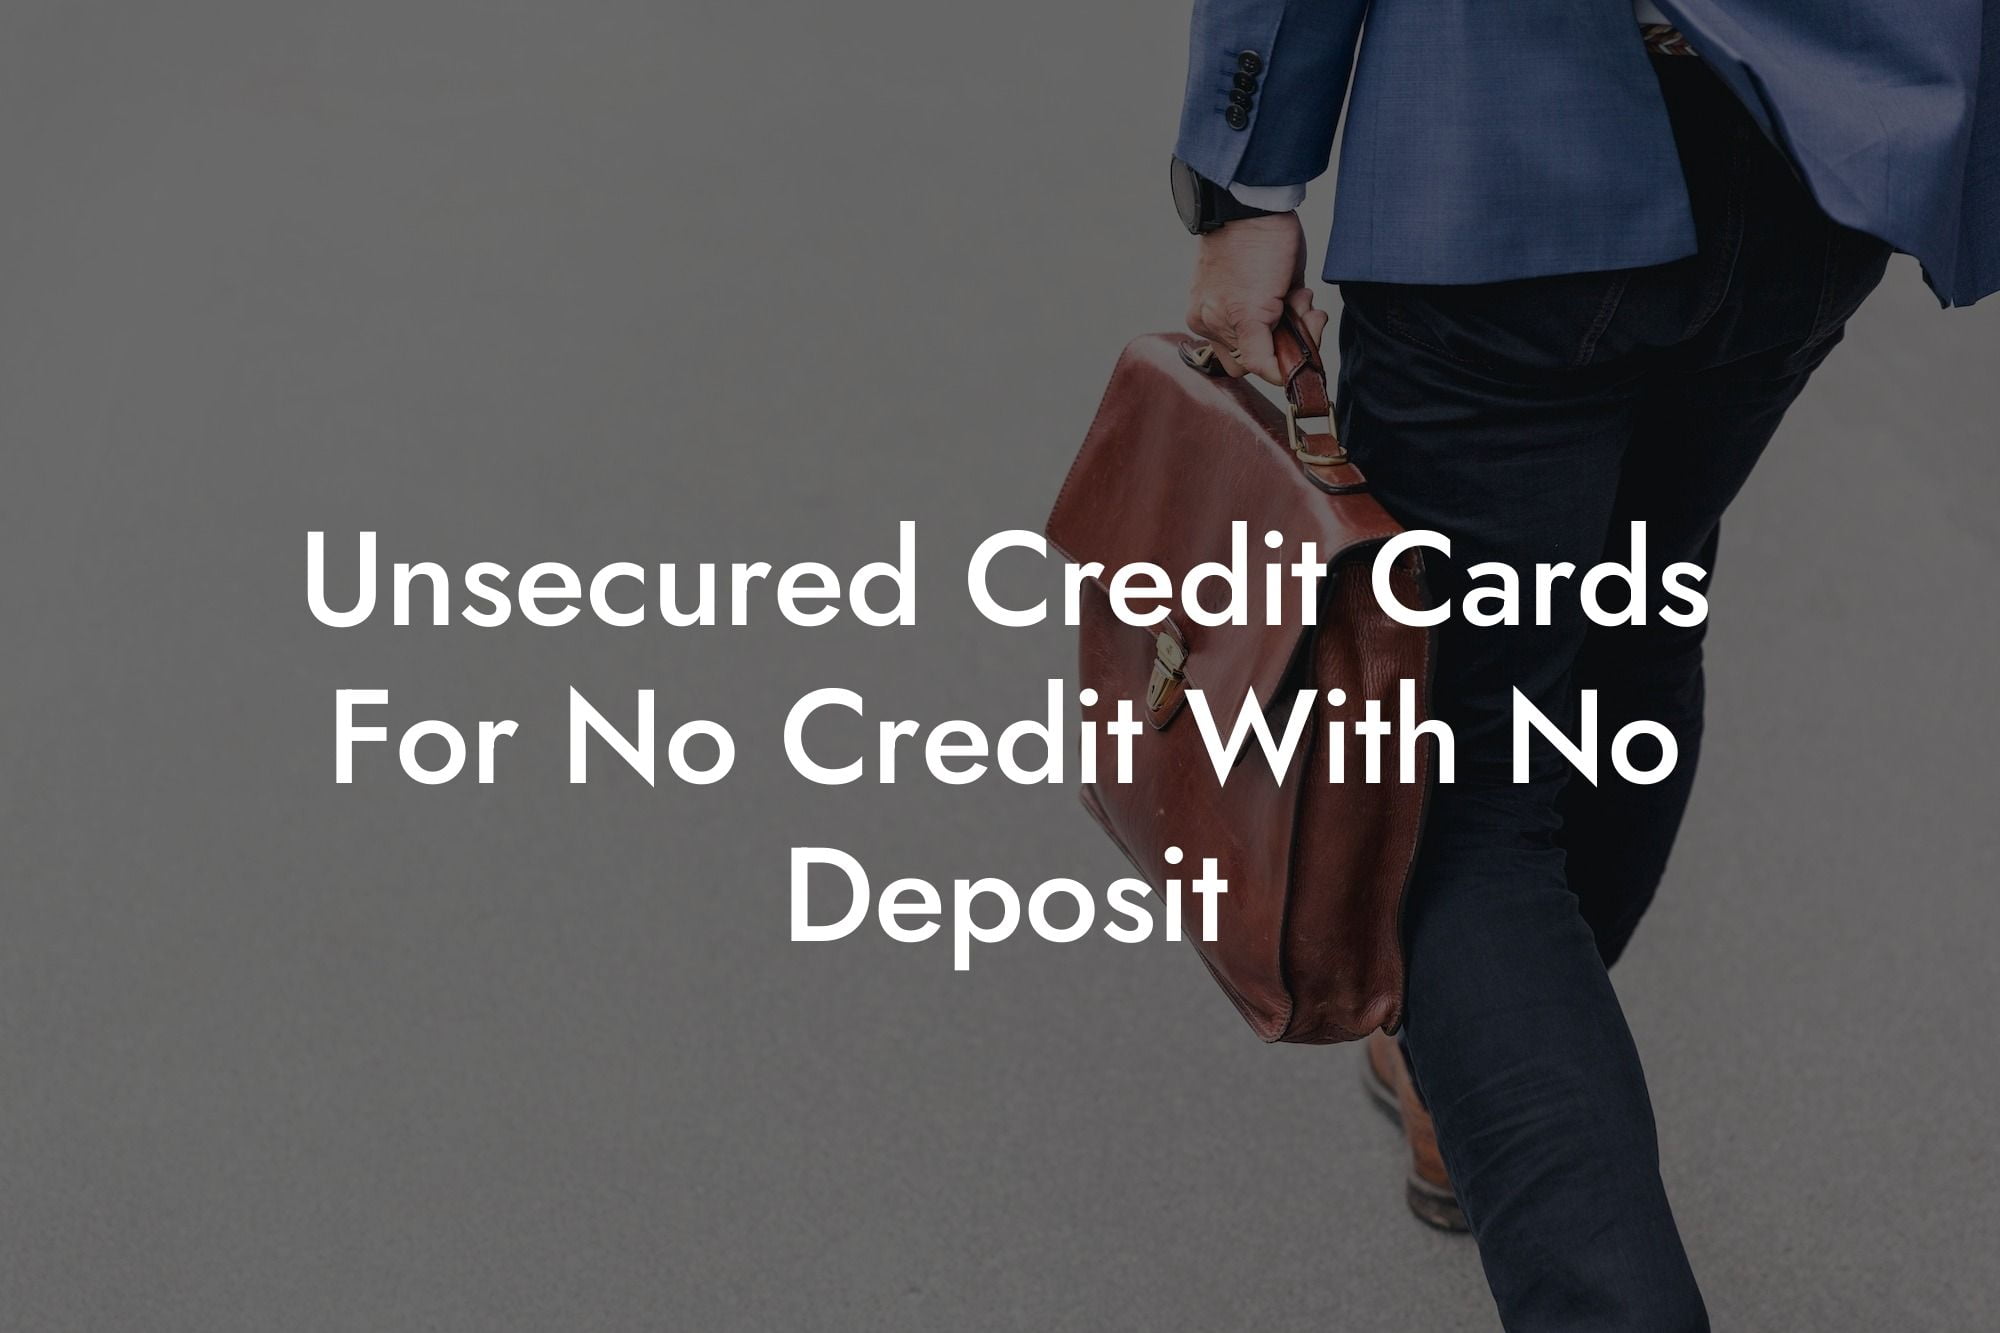 Unsecured Credit Cards For No Credit With No Deposit